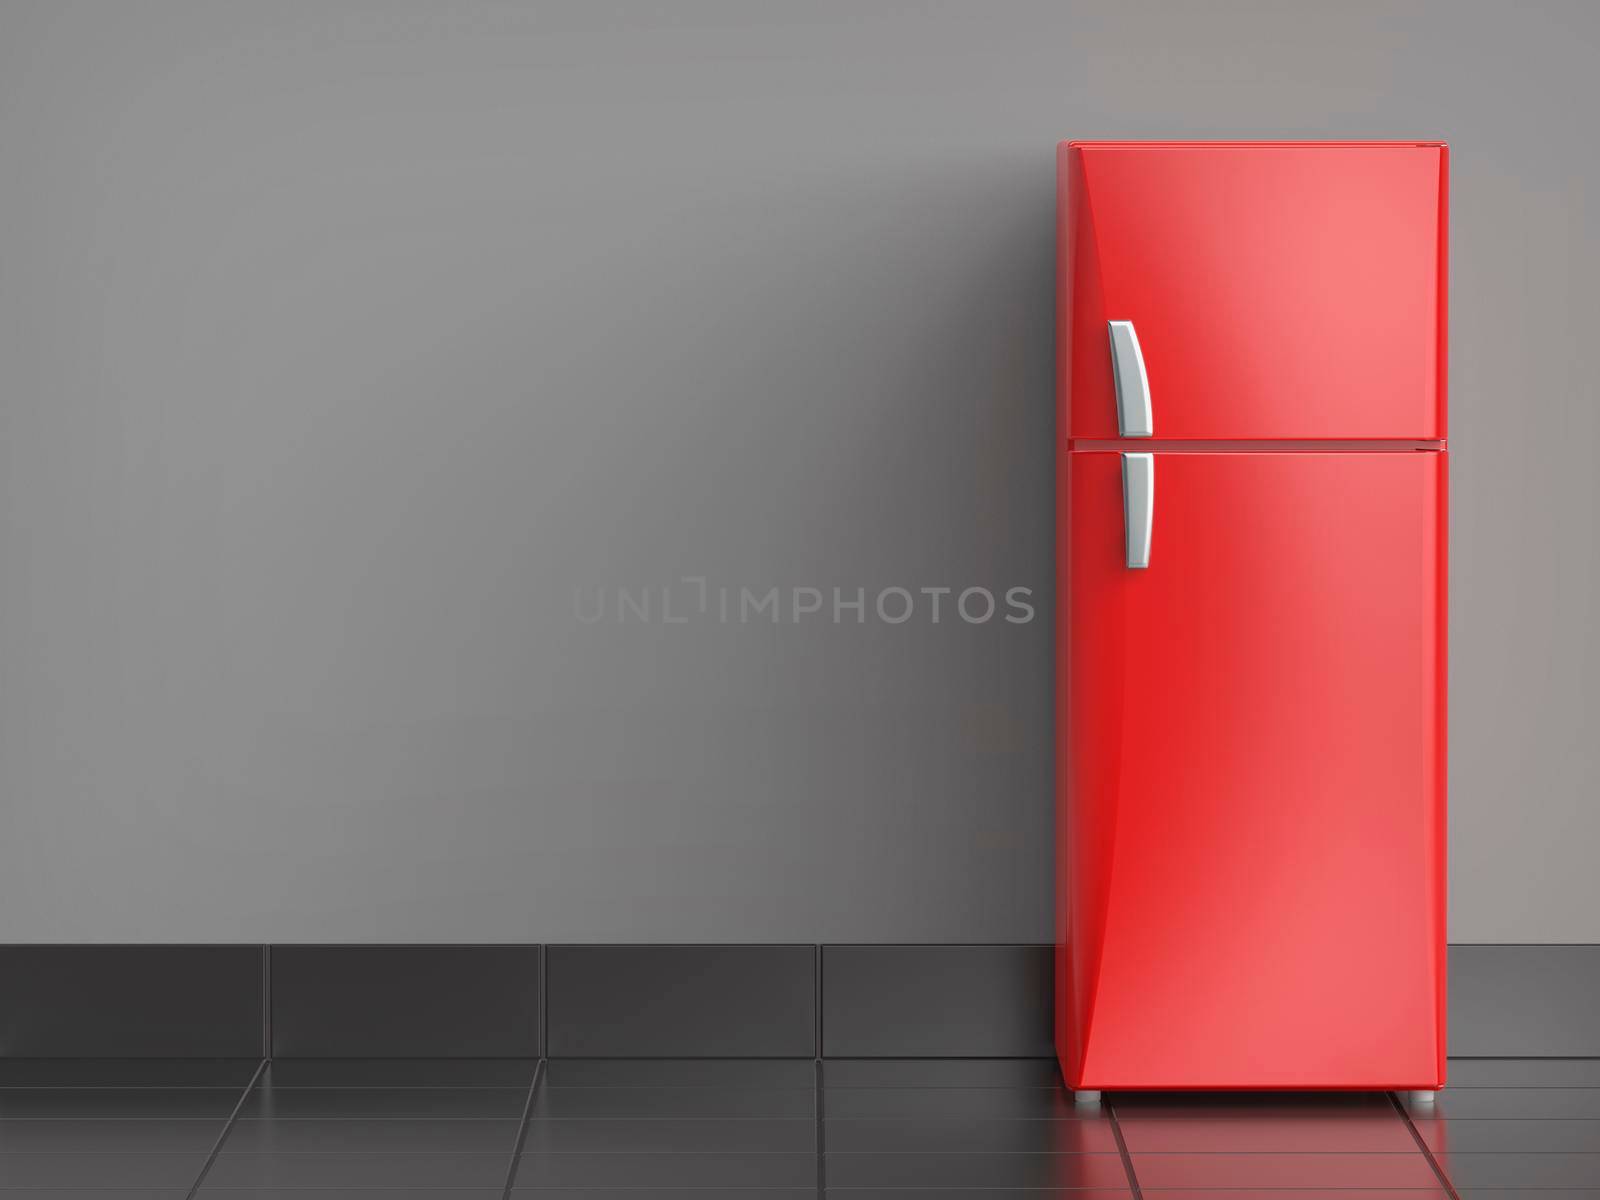 Red refrigerator in the kitchen by magraphics